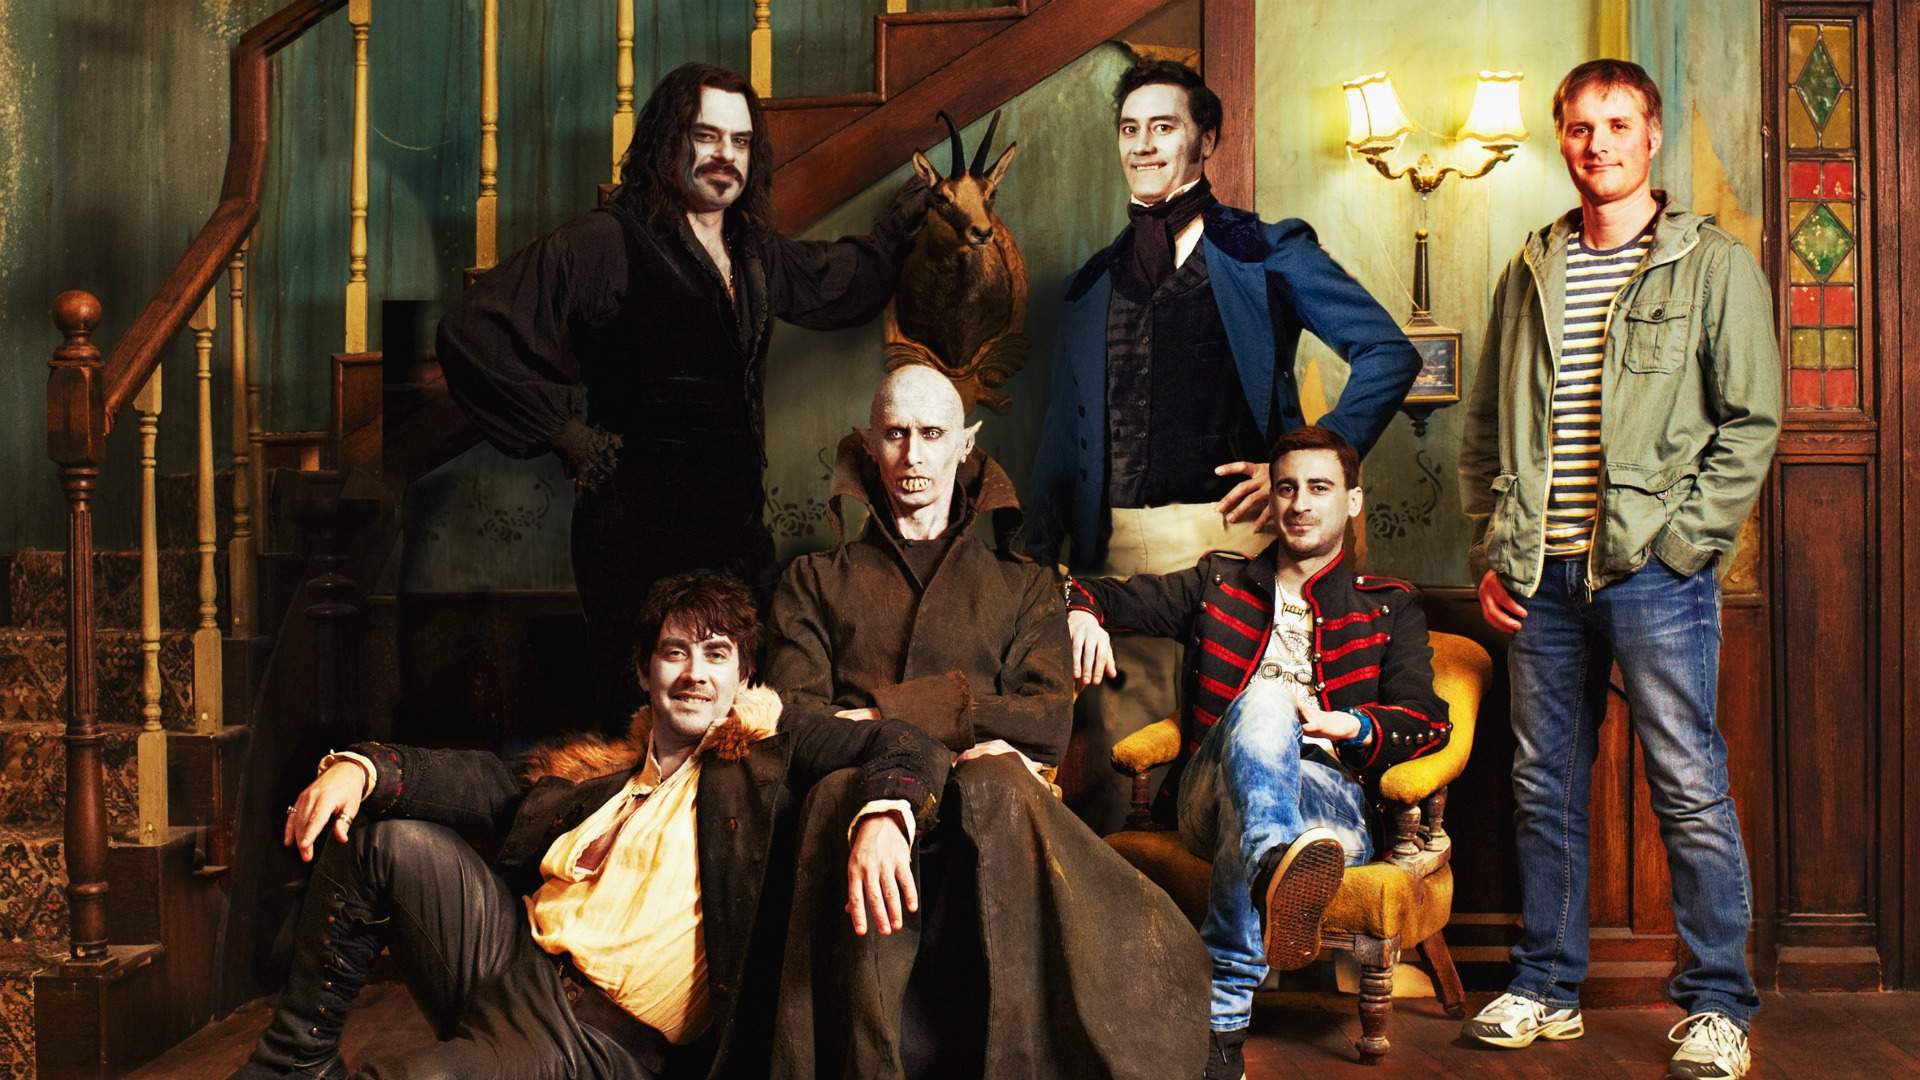 Halloween Outdoor Movie Night: What We Do In The Shadows